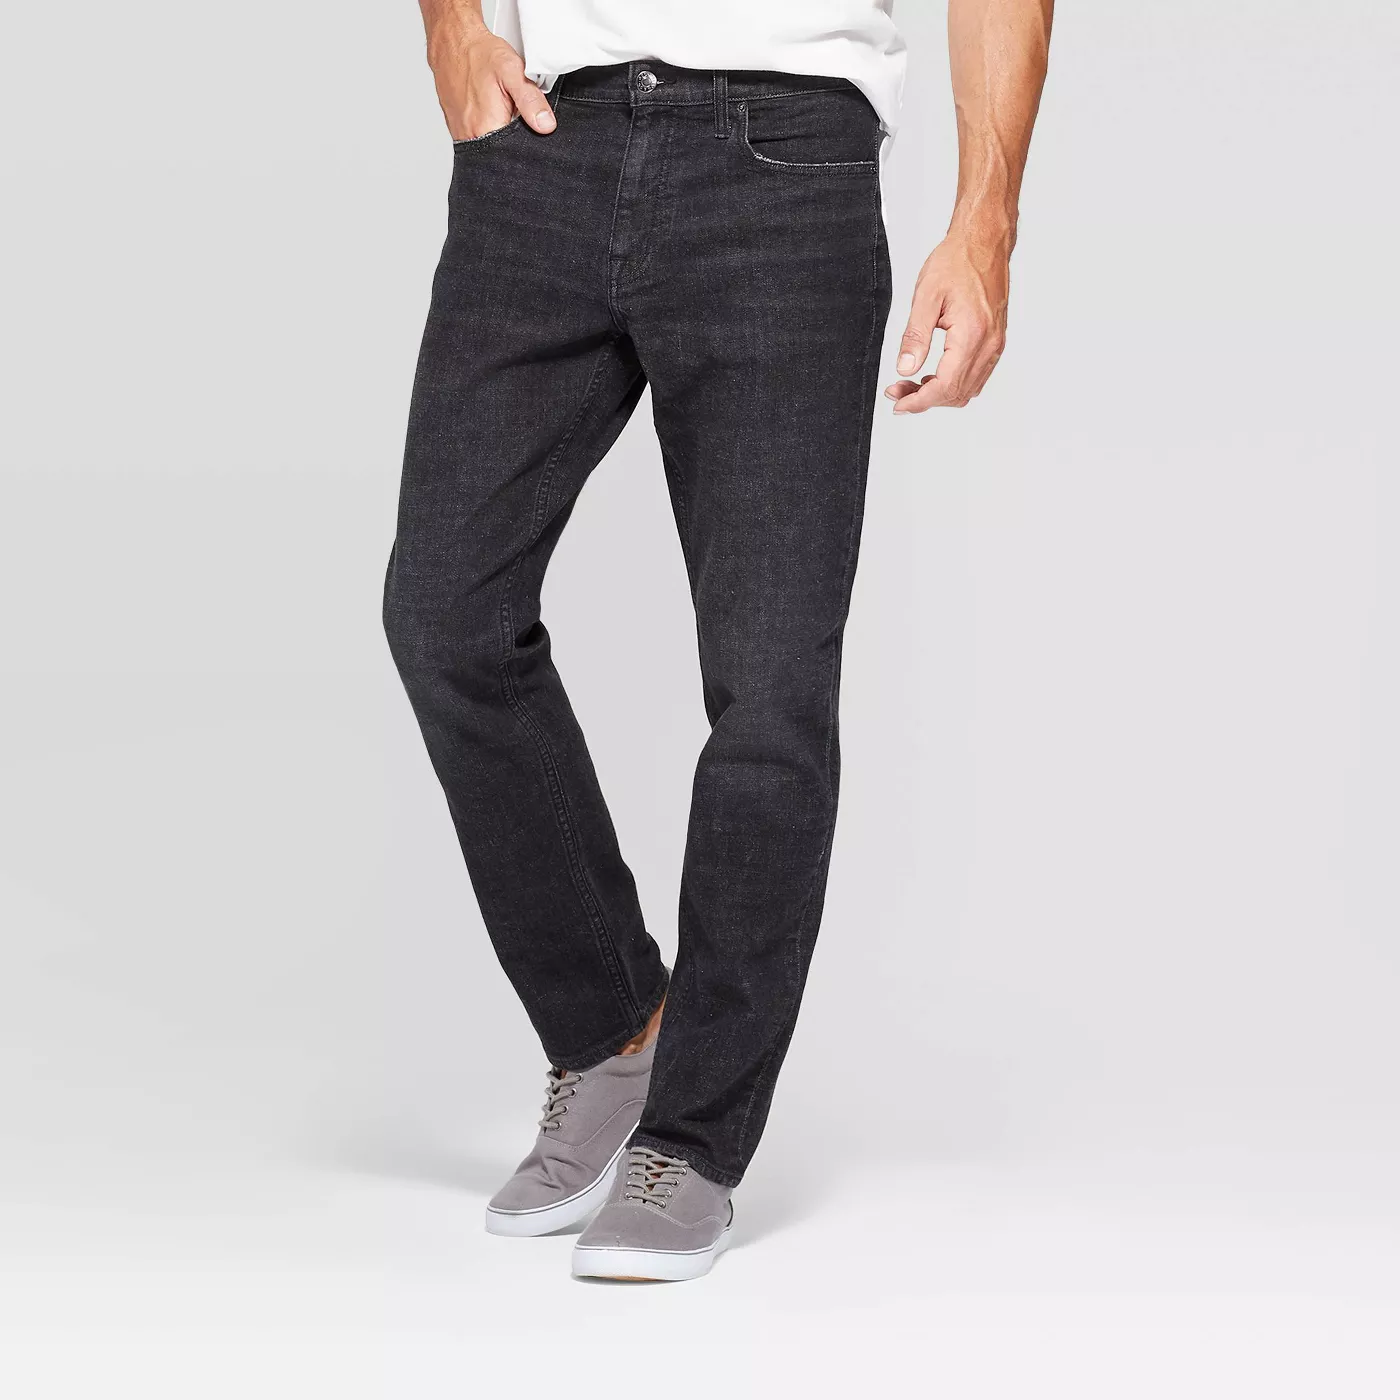 Men's 30 Relaxed Fit Jeans - Goodfellow & Co Black 30x30 - Jeans